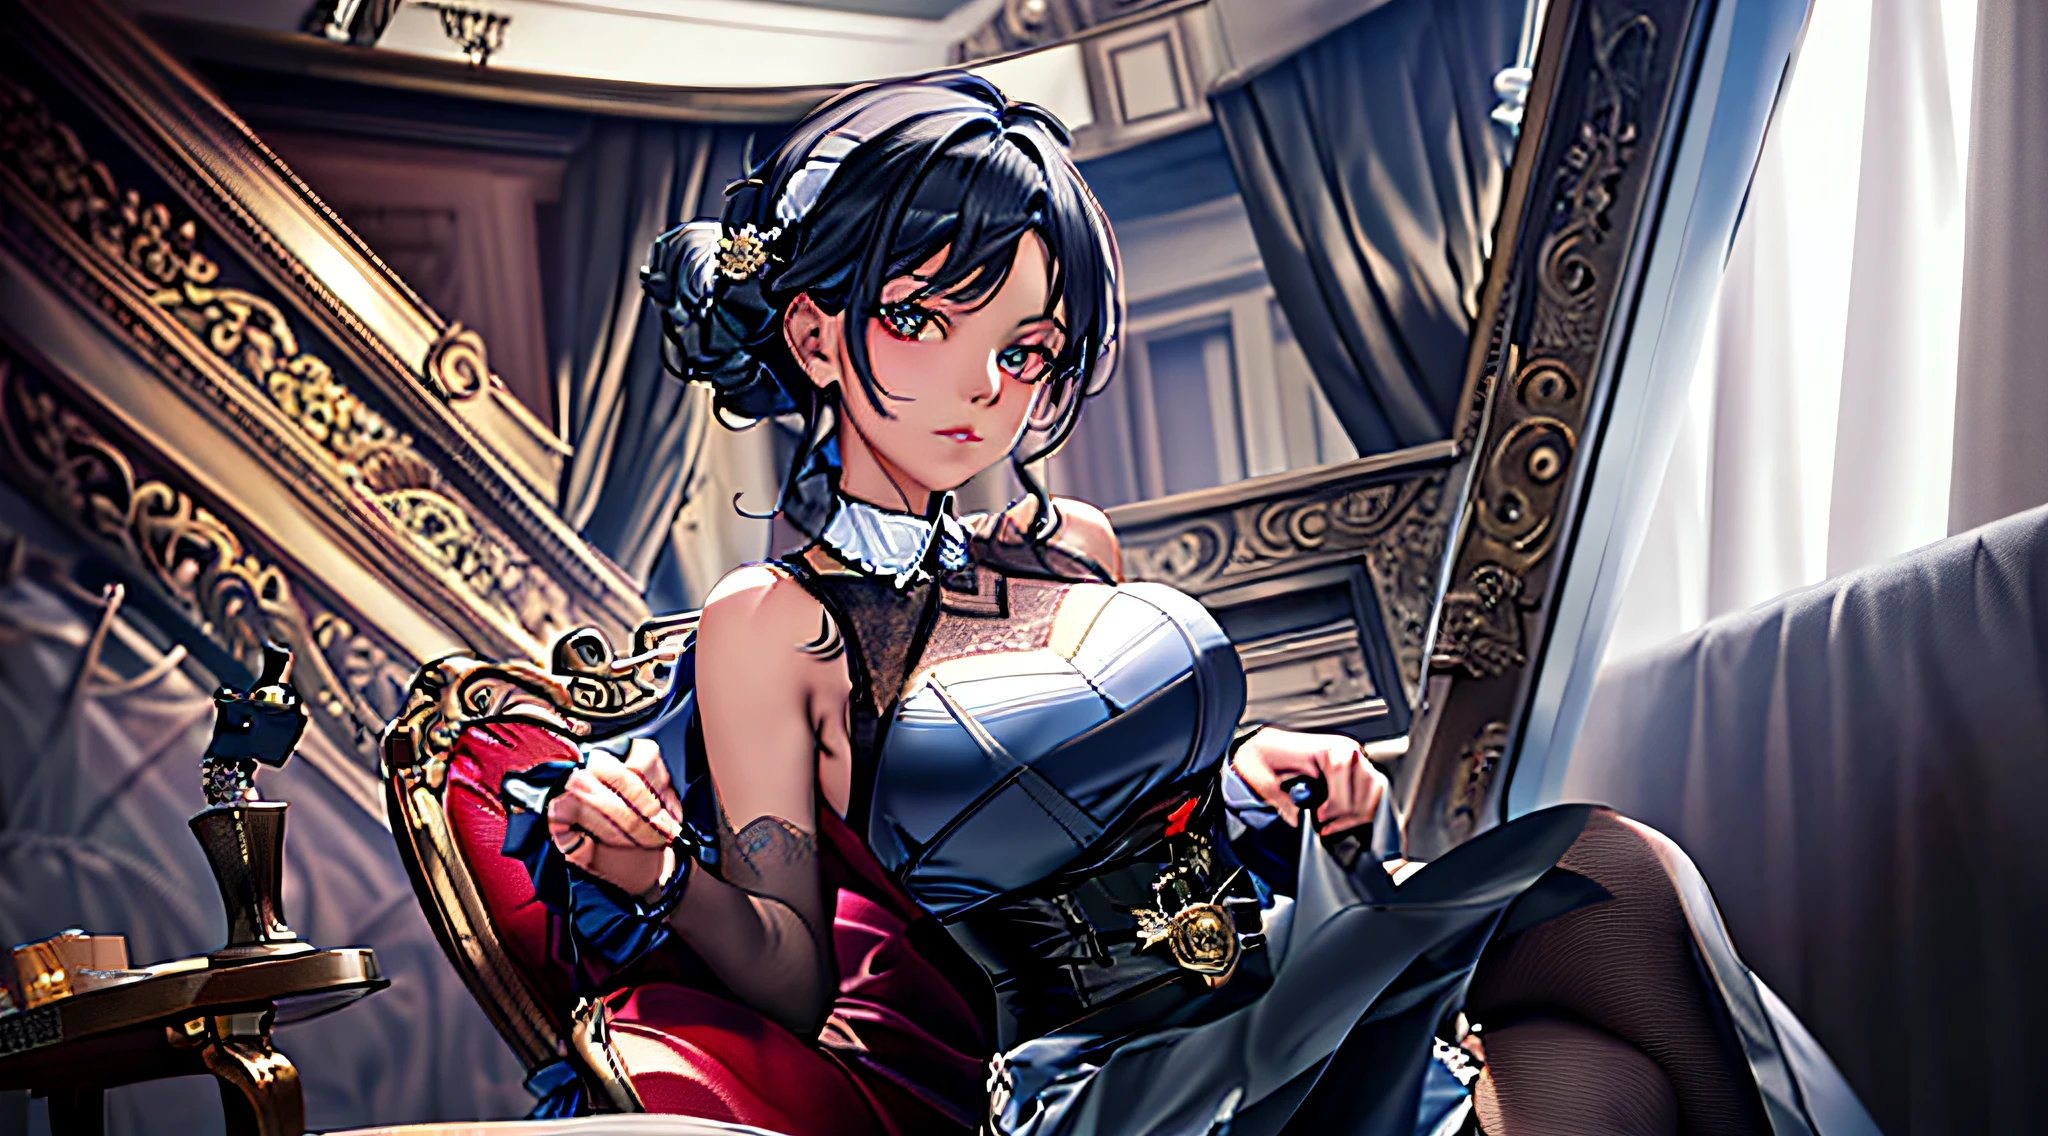 there is a woman in a corset sitting on a chair, seductive anime girls, Kushatt Krenz Key Art Women, beautiful and seductive anime woman, trending on artstation pixiv, Guweiz in Pixiv ArtStation, Guweiz on ArtStation Pixiv, Artgerm on ArtStation Pixiv, Extremely detailed Artgerm